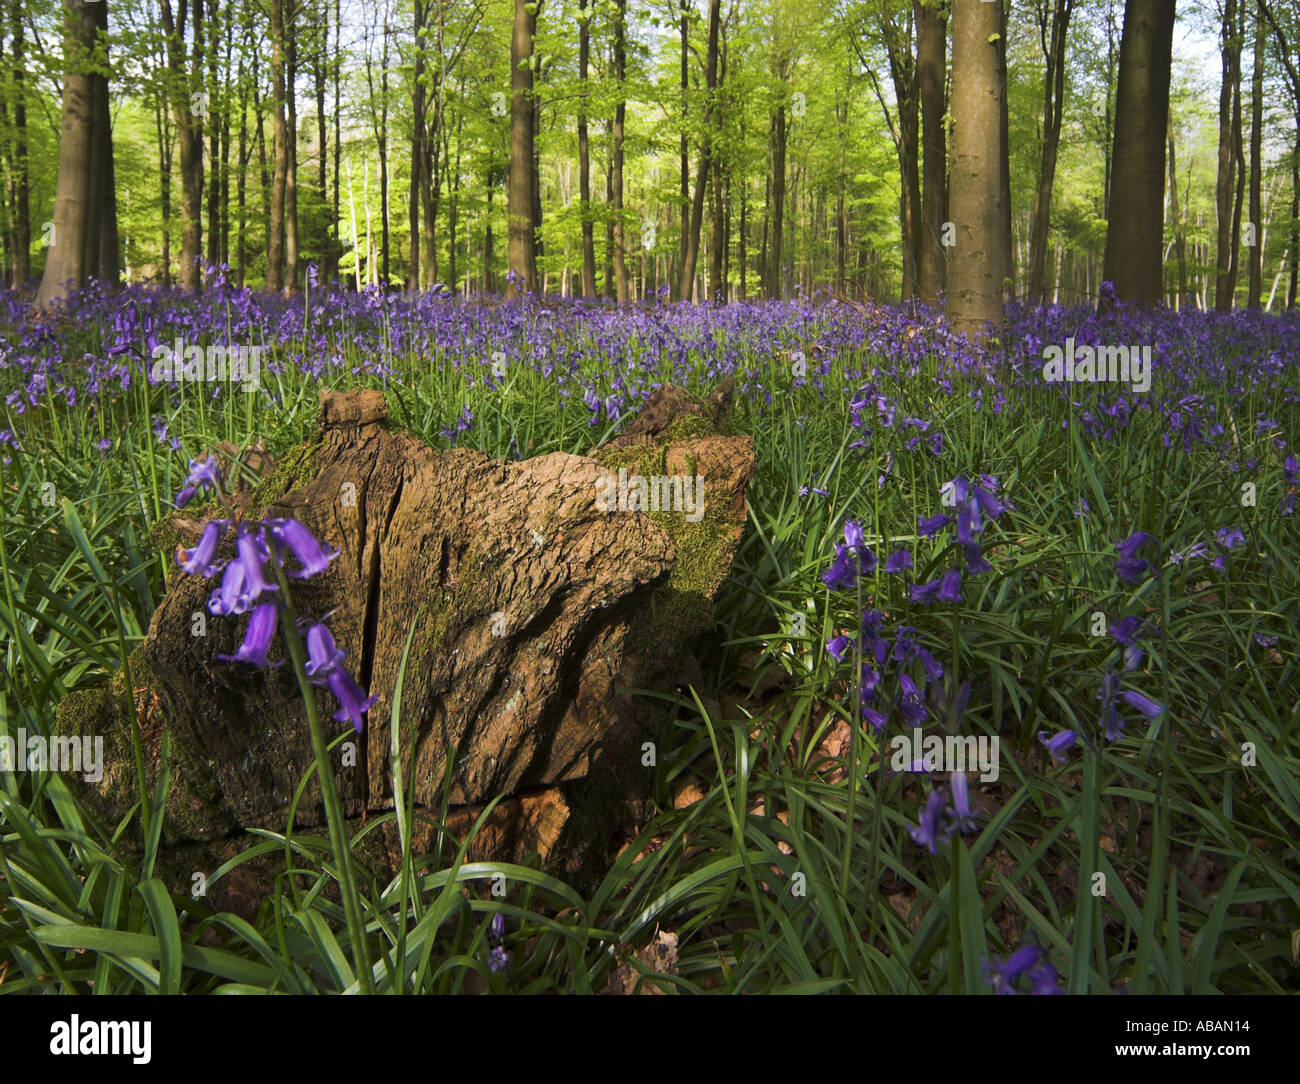 woodland carpeted with bluebells / wildflowers with upright trees and fresh cool green leaves and foliage Stock Photo